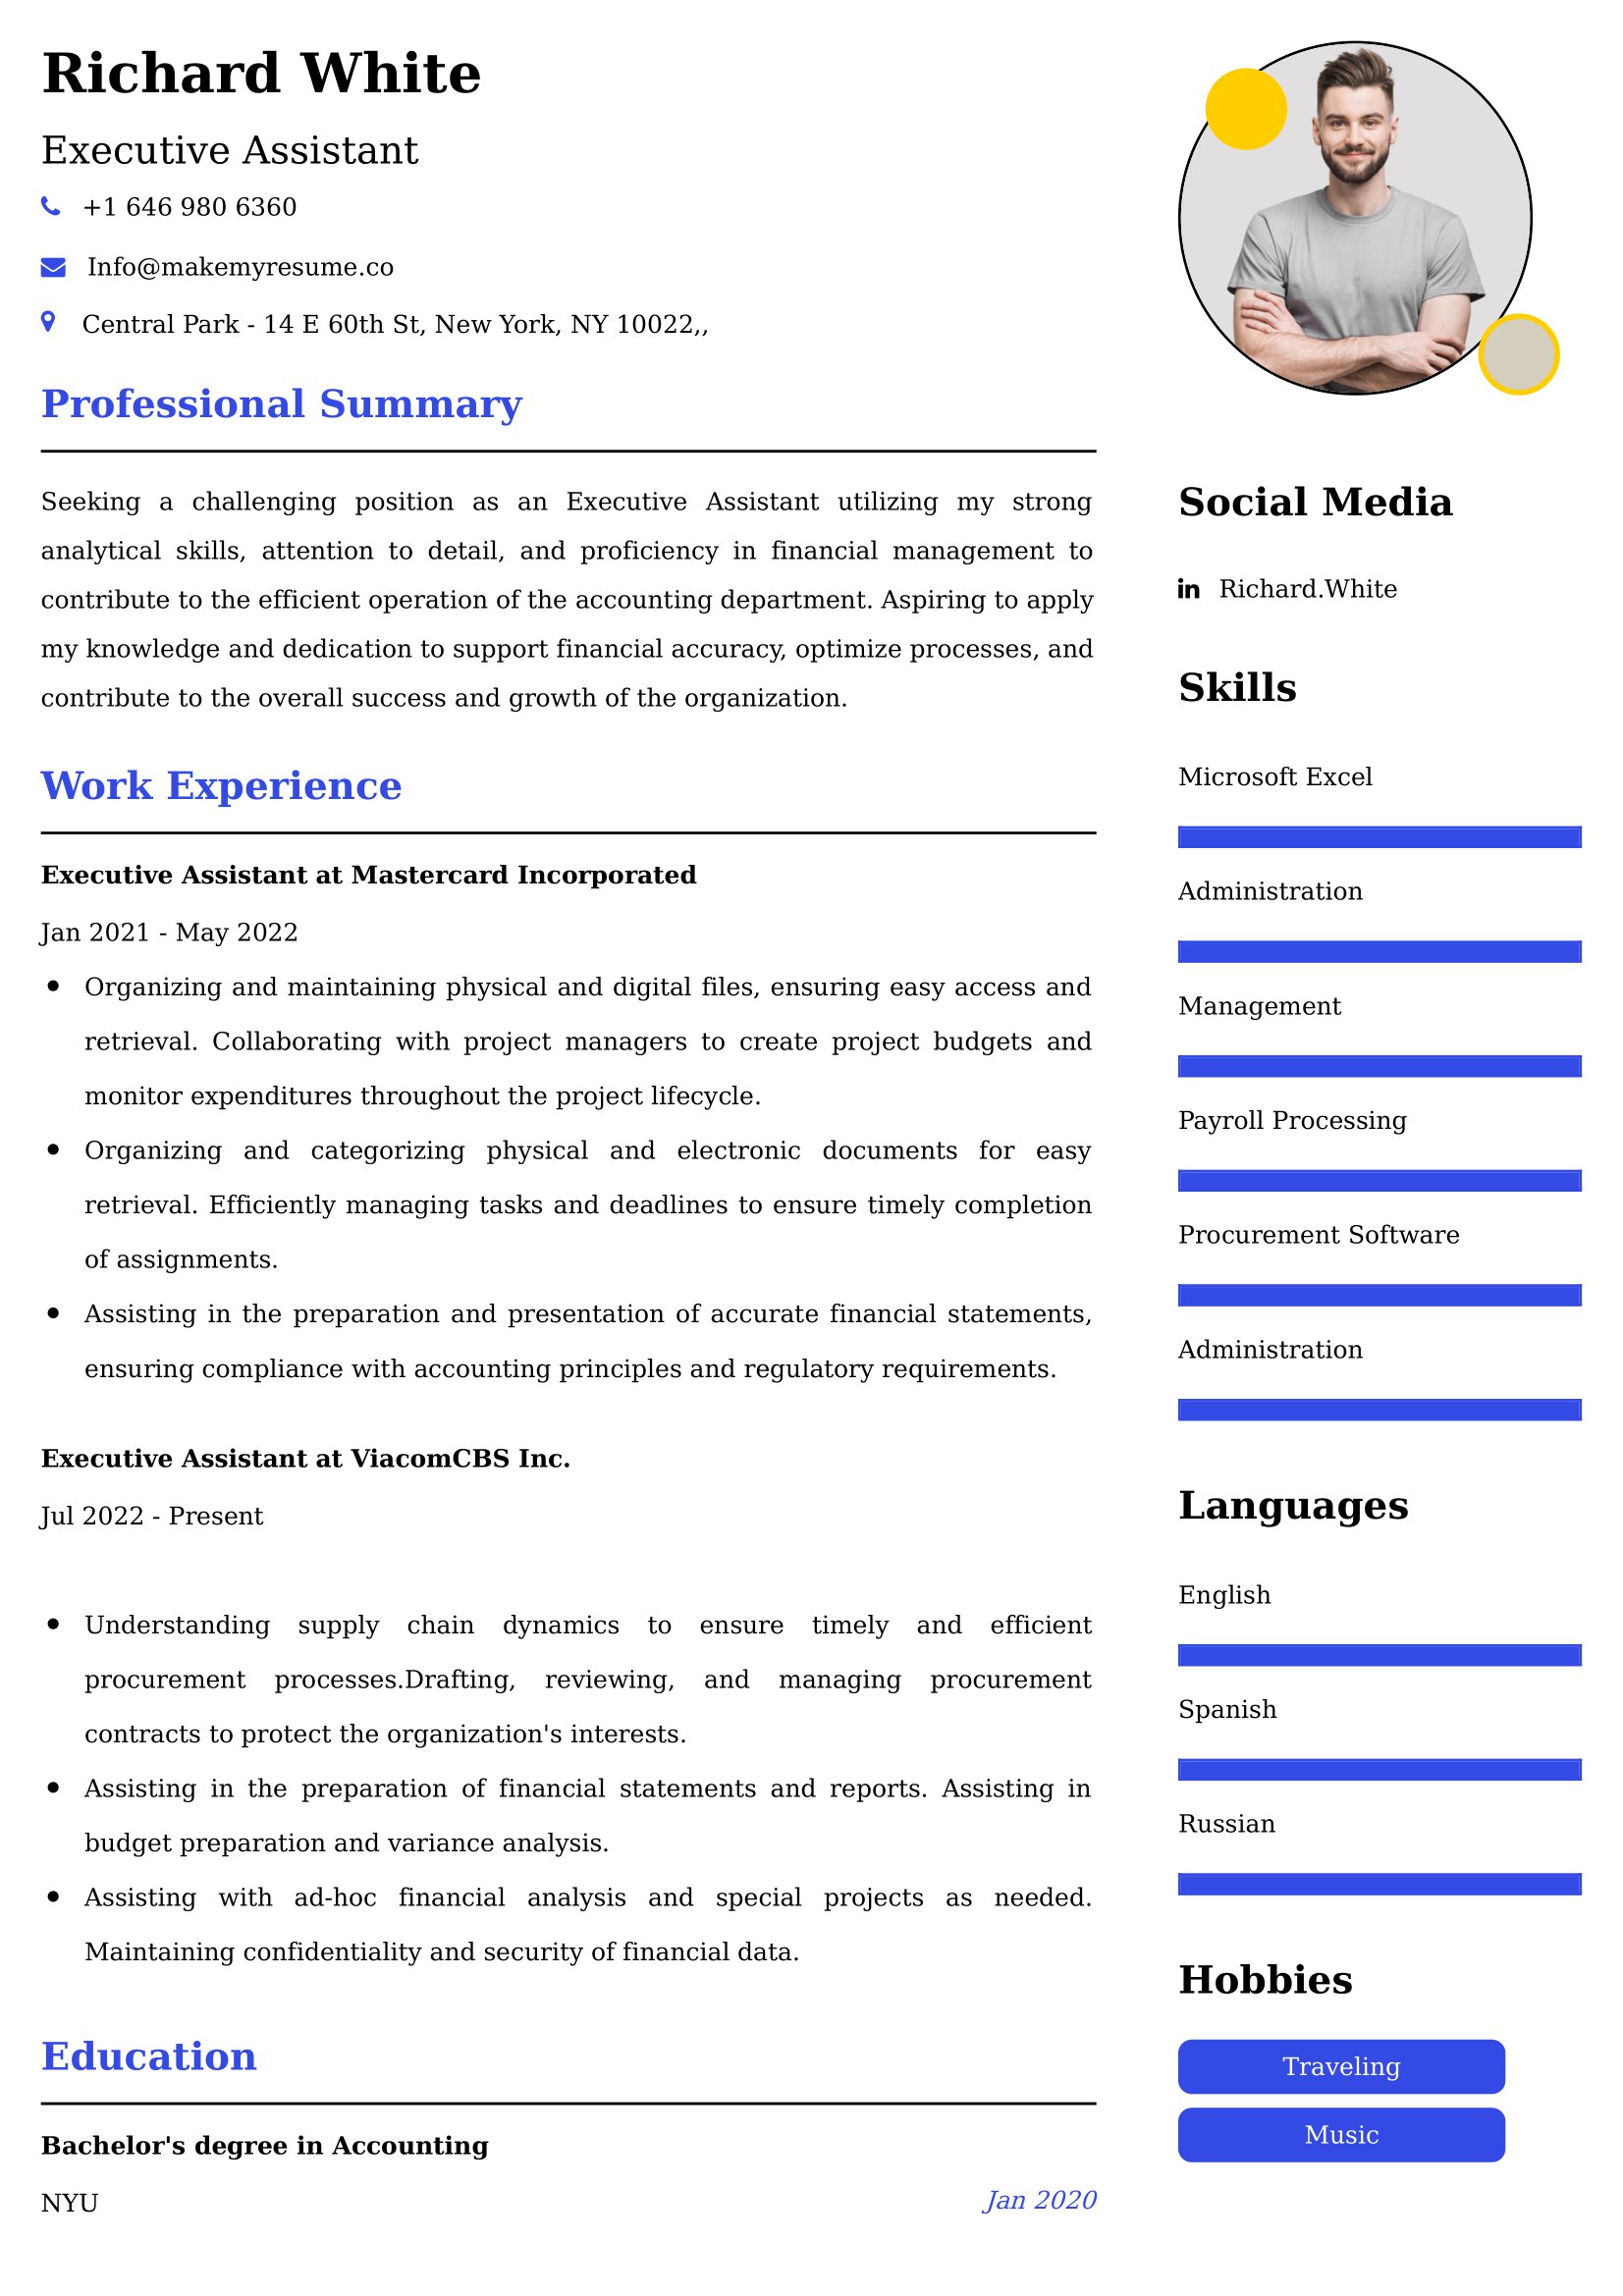 Executive Assistant Resume Examples - Brazilian Format, Latest Template